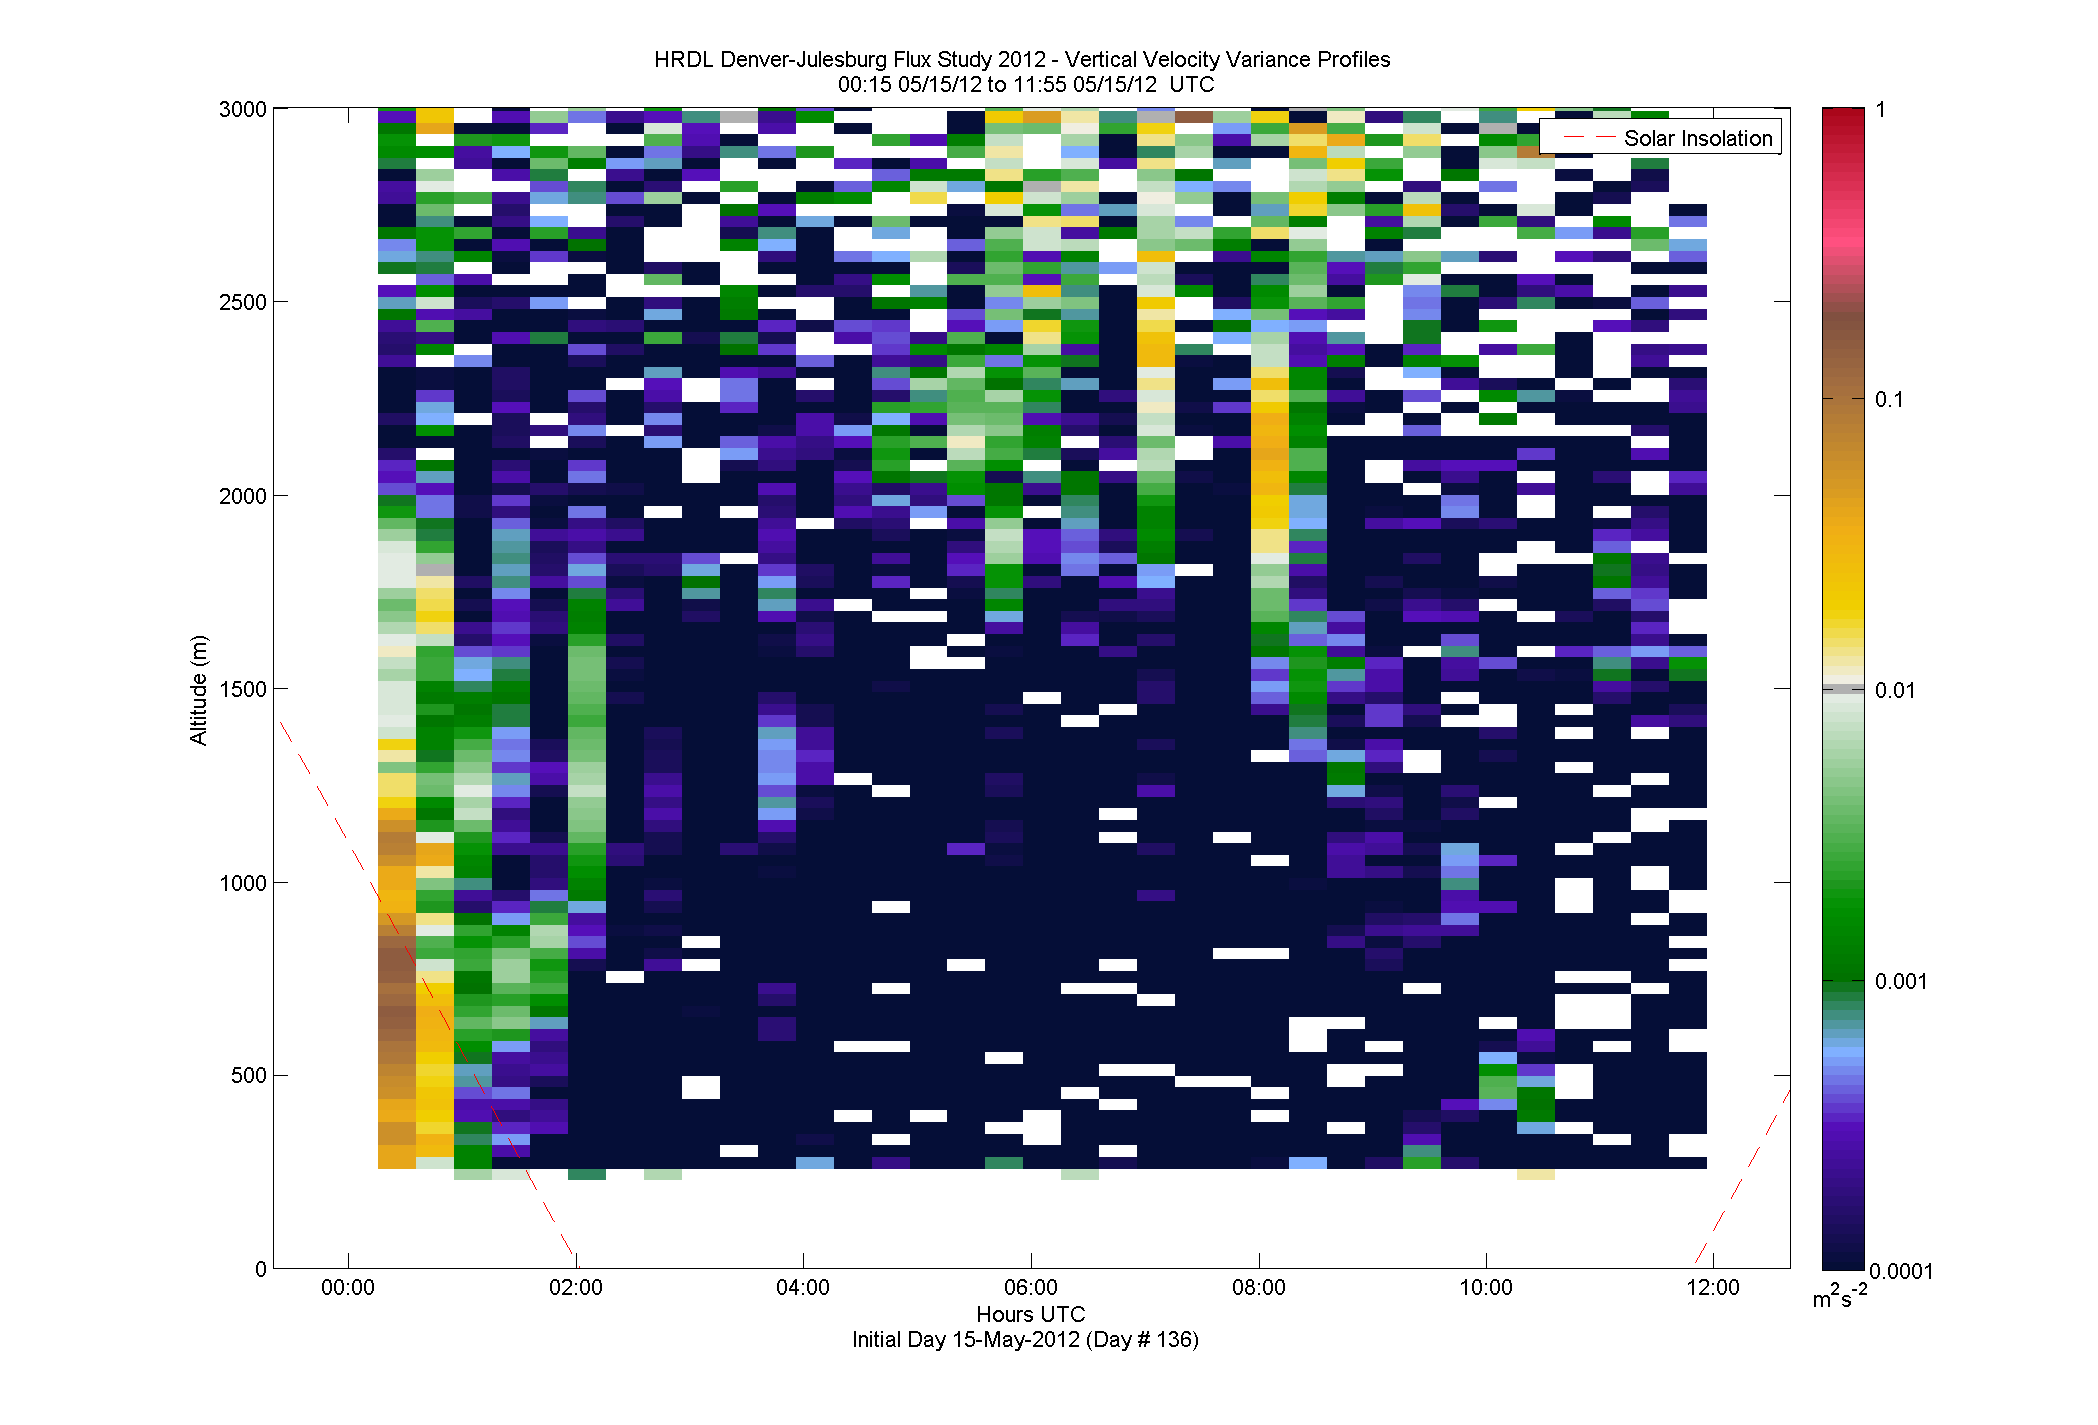 HRDL vertical variance profile - May 15 am